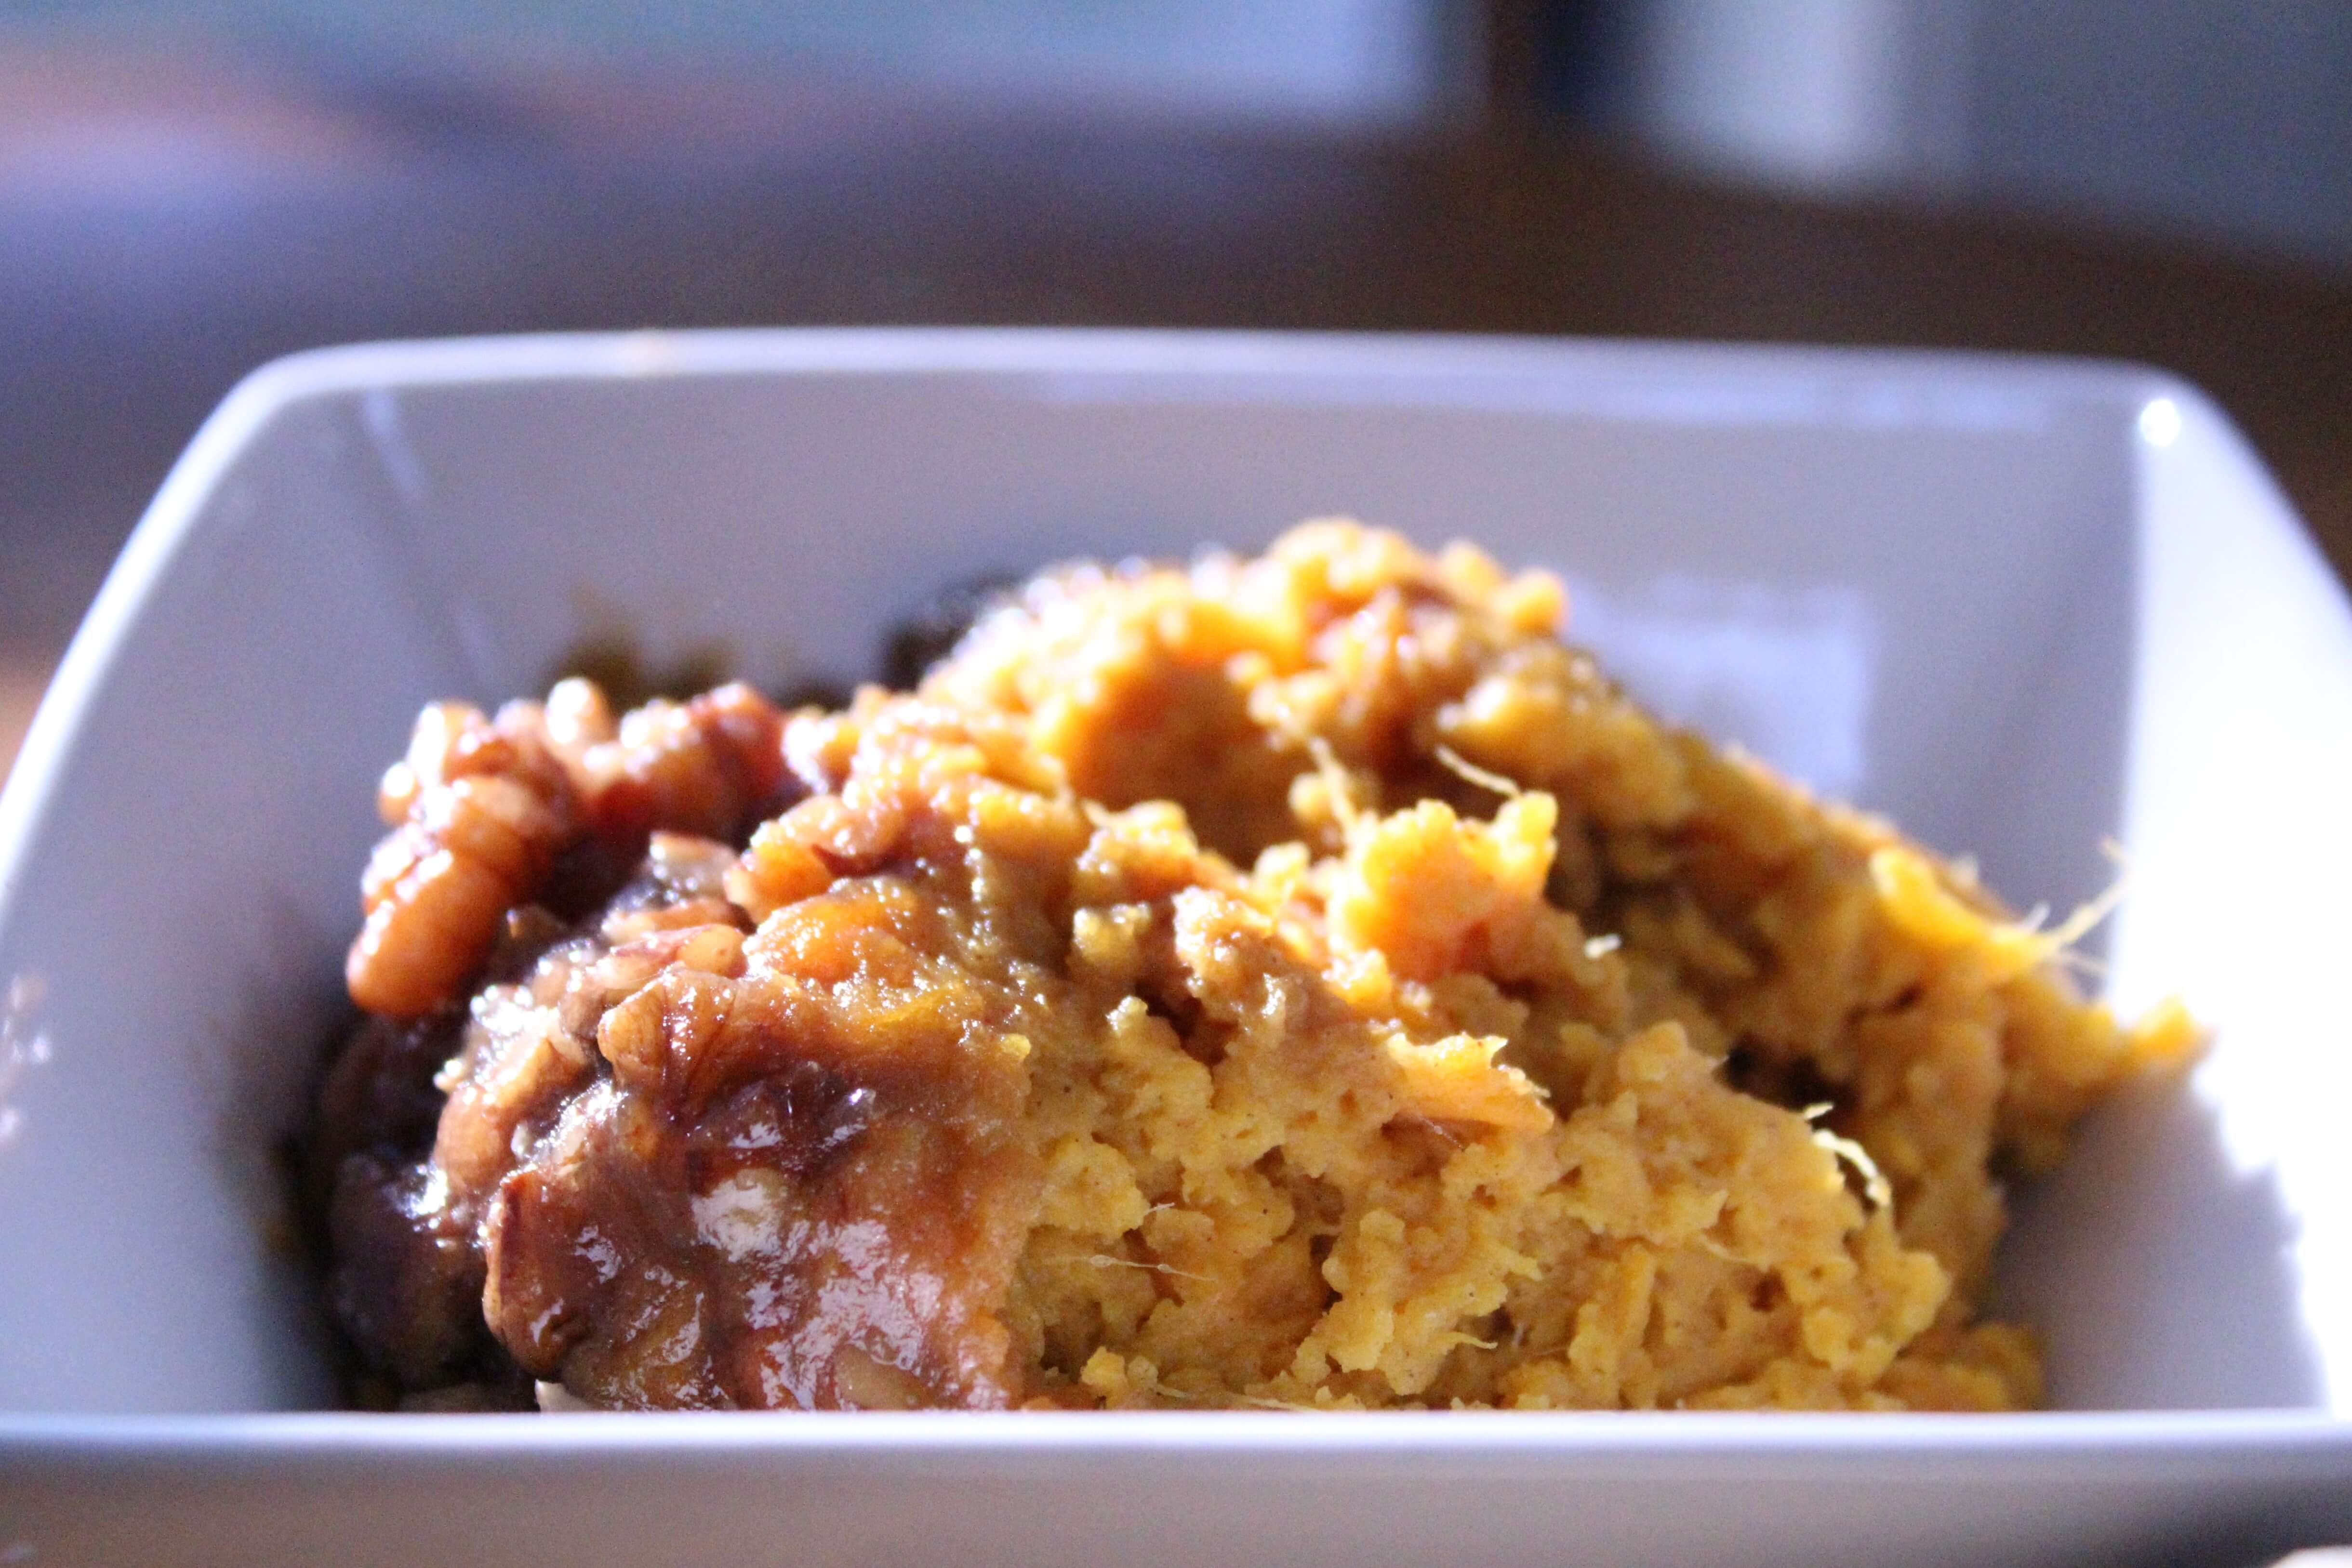 This slow cooker recipe for sweet potato casserole is as easy as it is delicious.